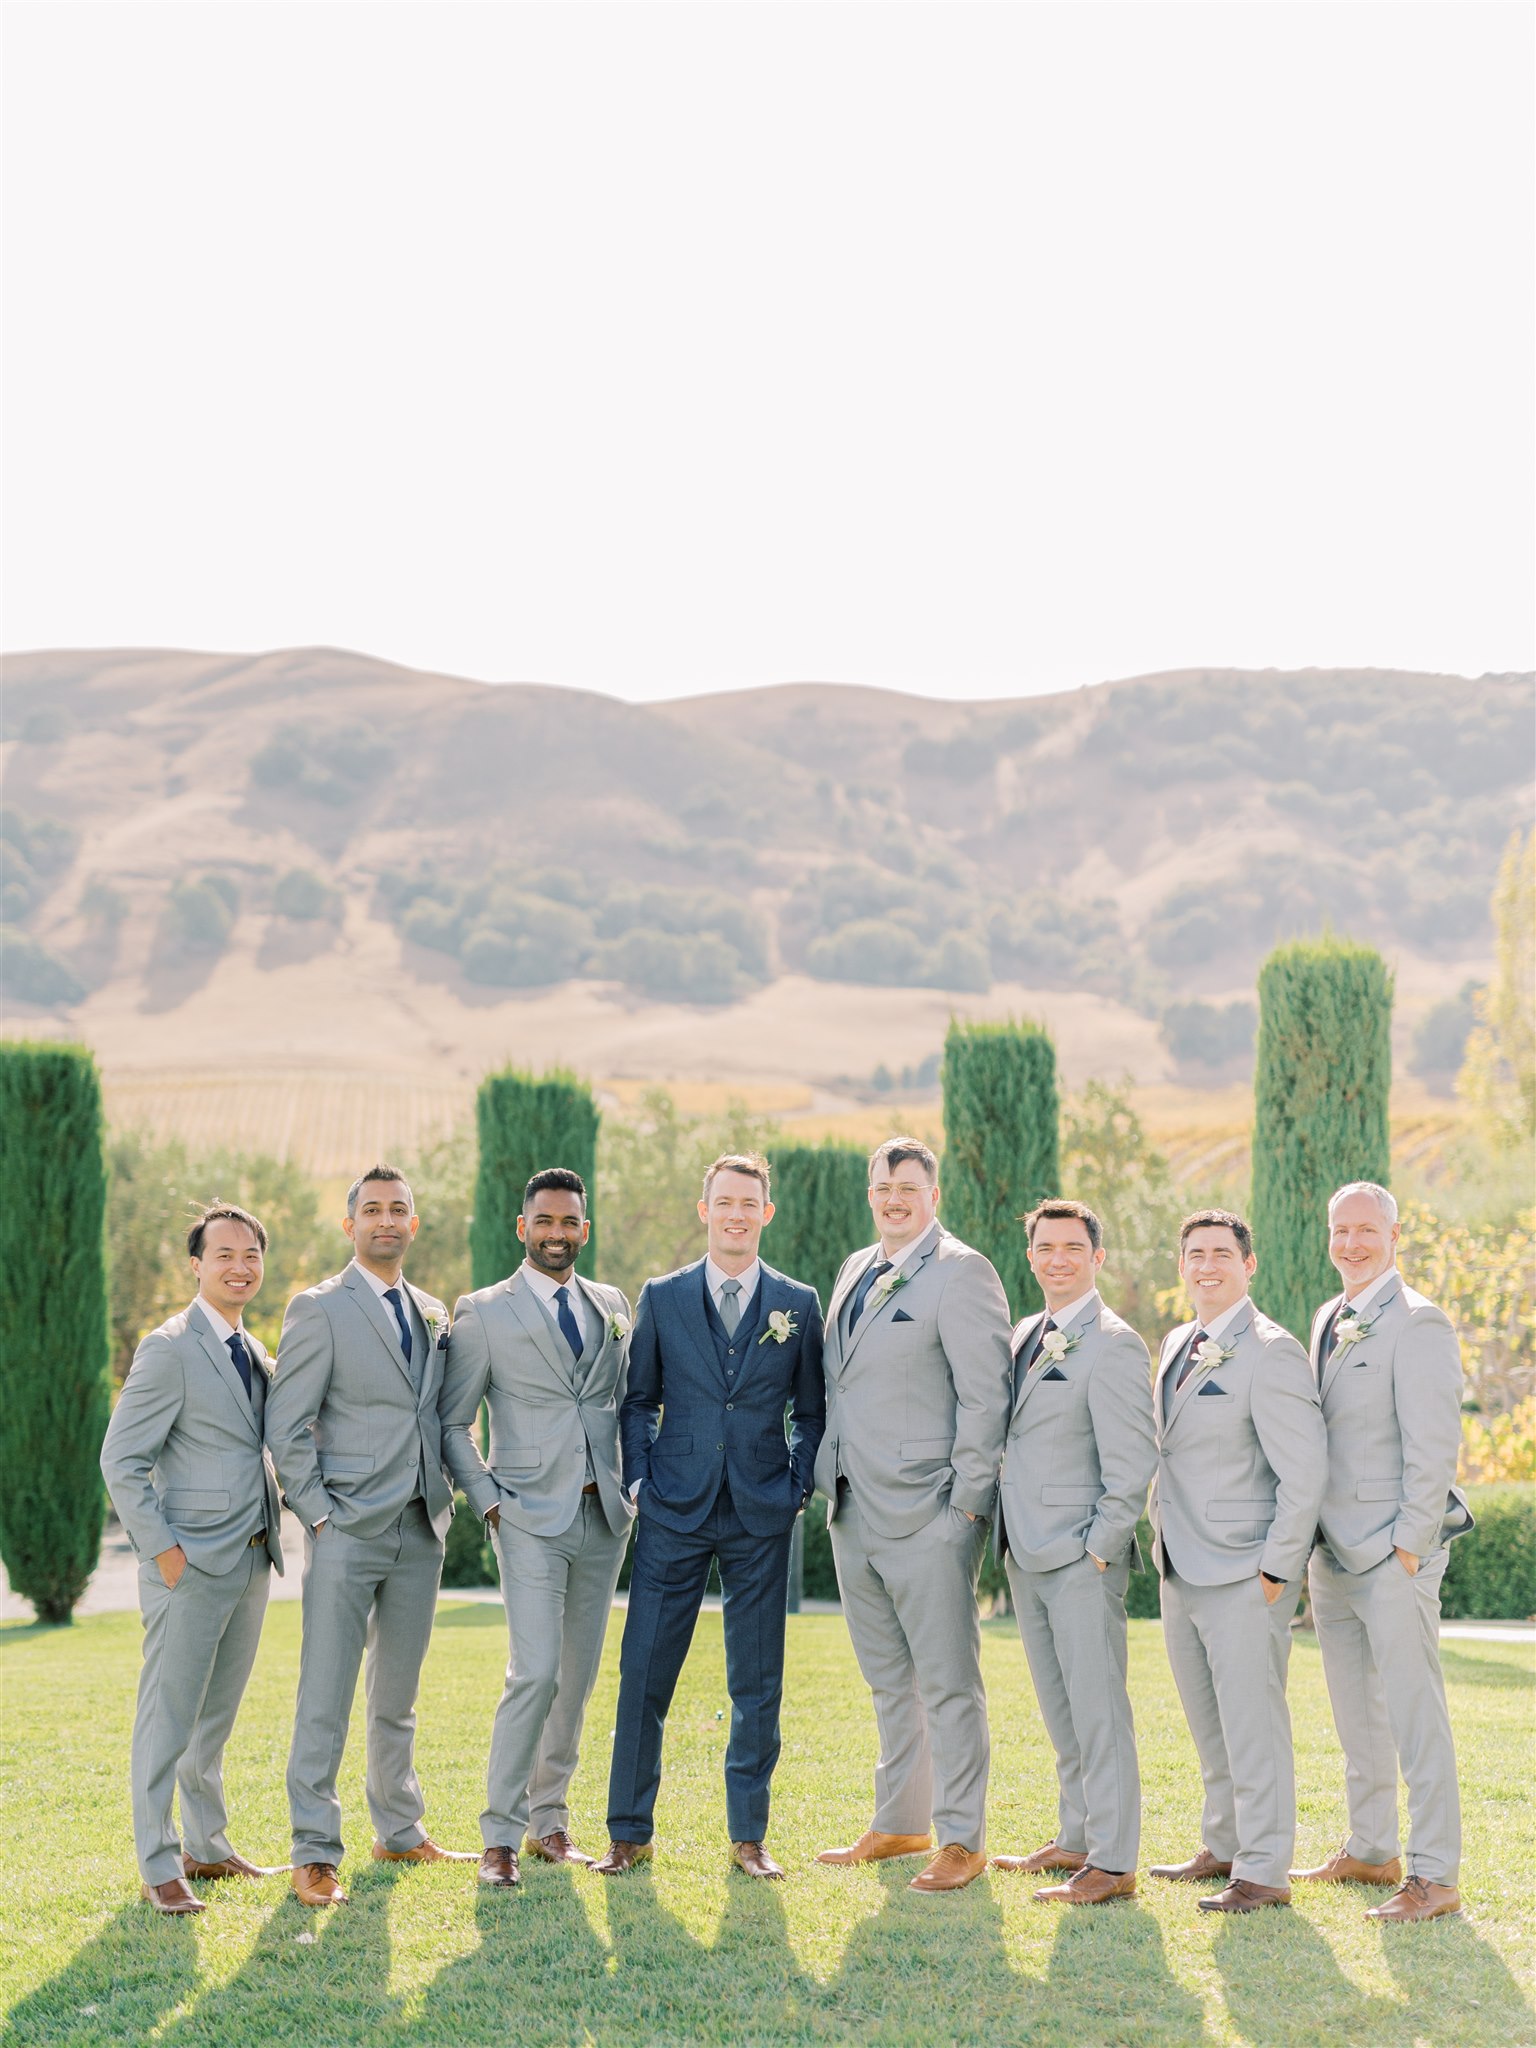 A groom and his groomsmen outside in a spring field posing in spring wedding suit colors